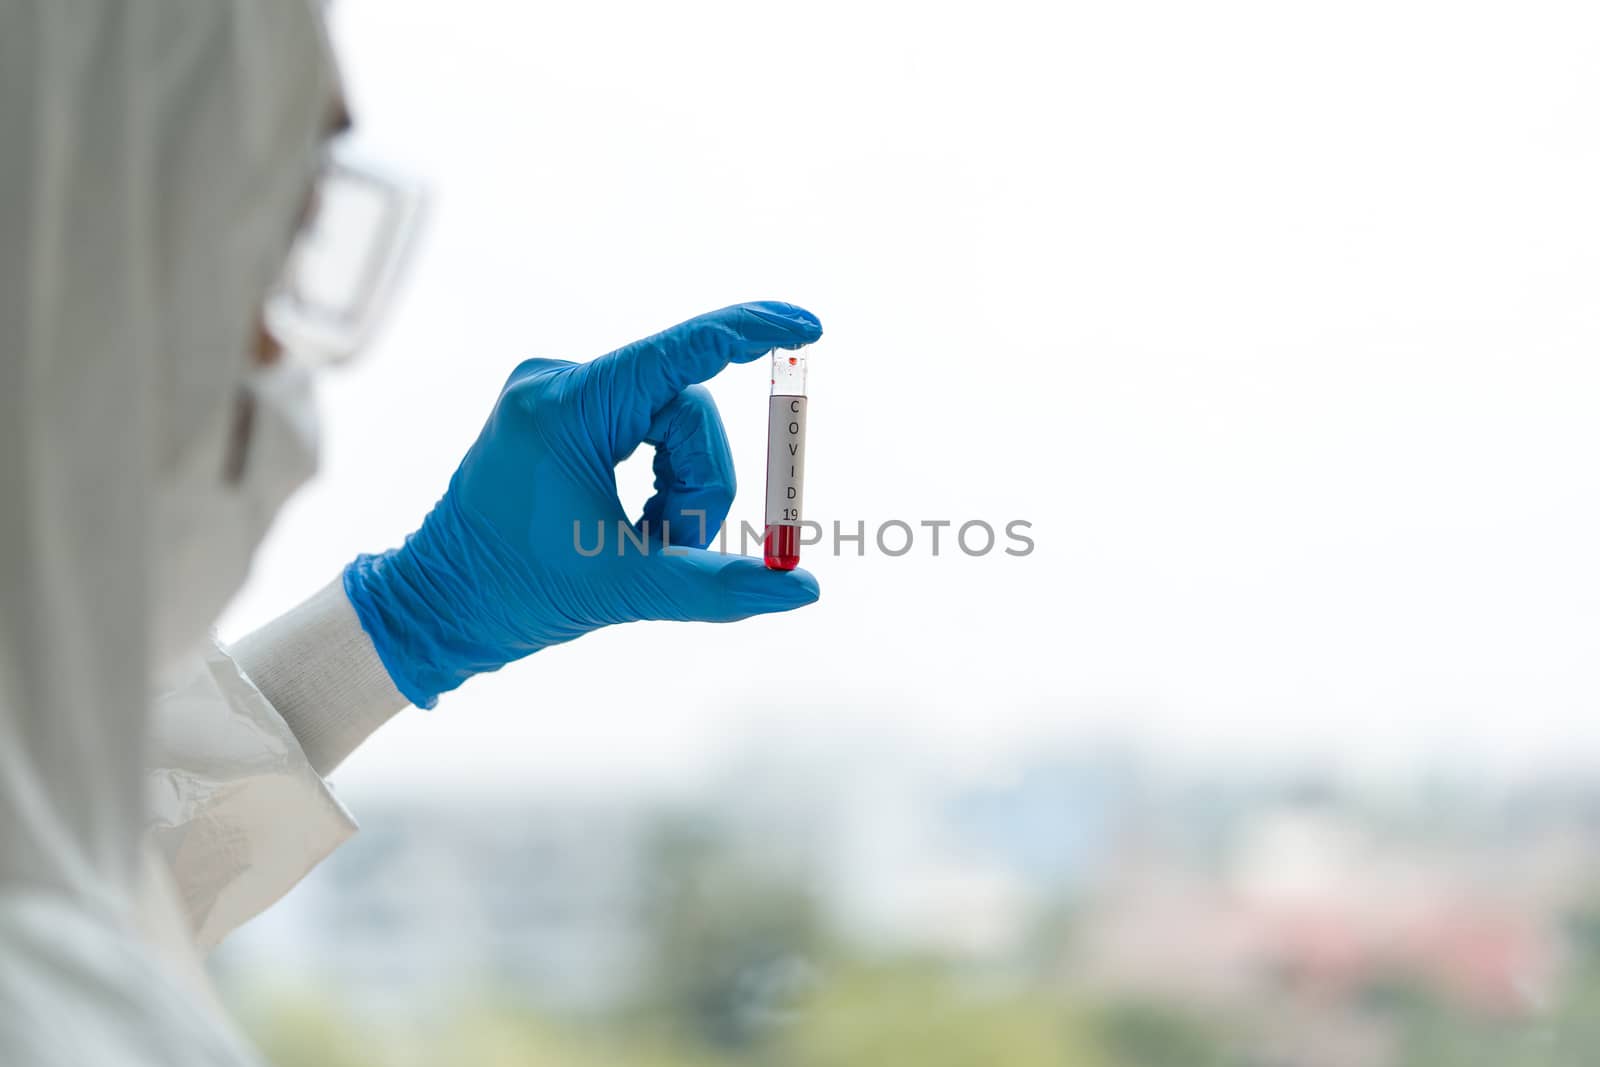 Epidemiological researchers in virus protective clothing are looking at blood samples of patients infected with Covid-19. Coronavirus disease 2019 testing process in a laboratory.